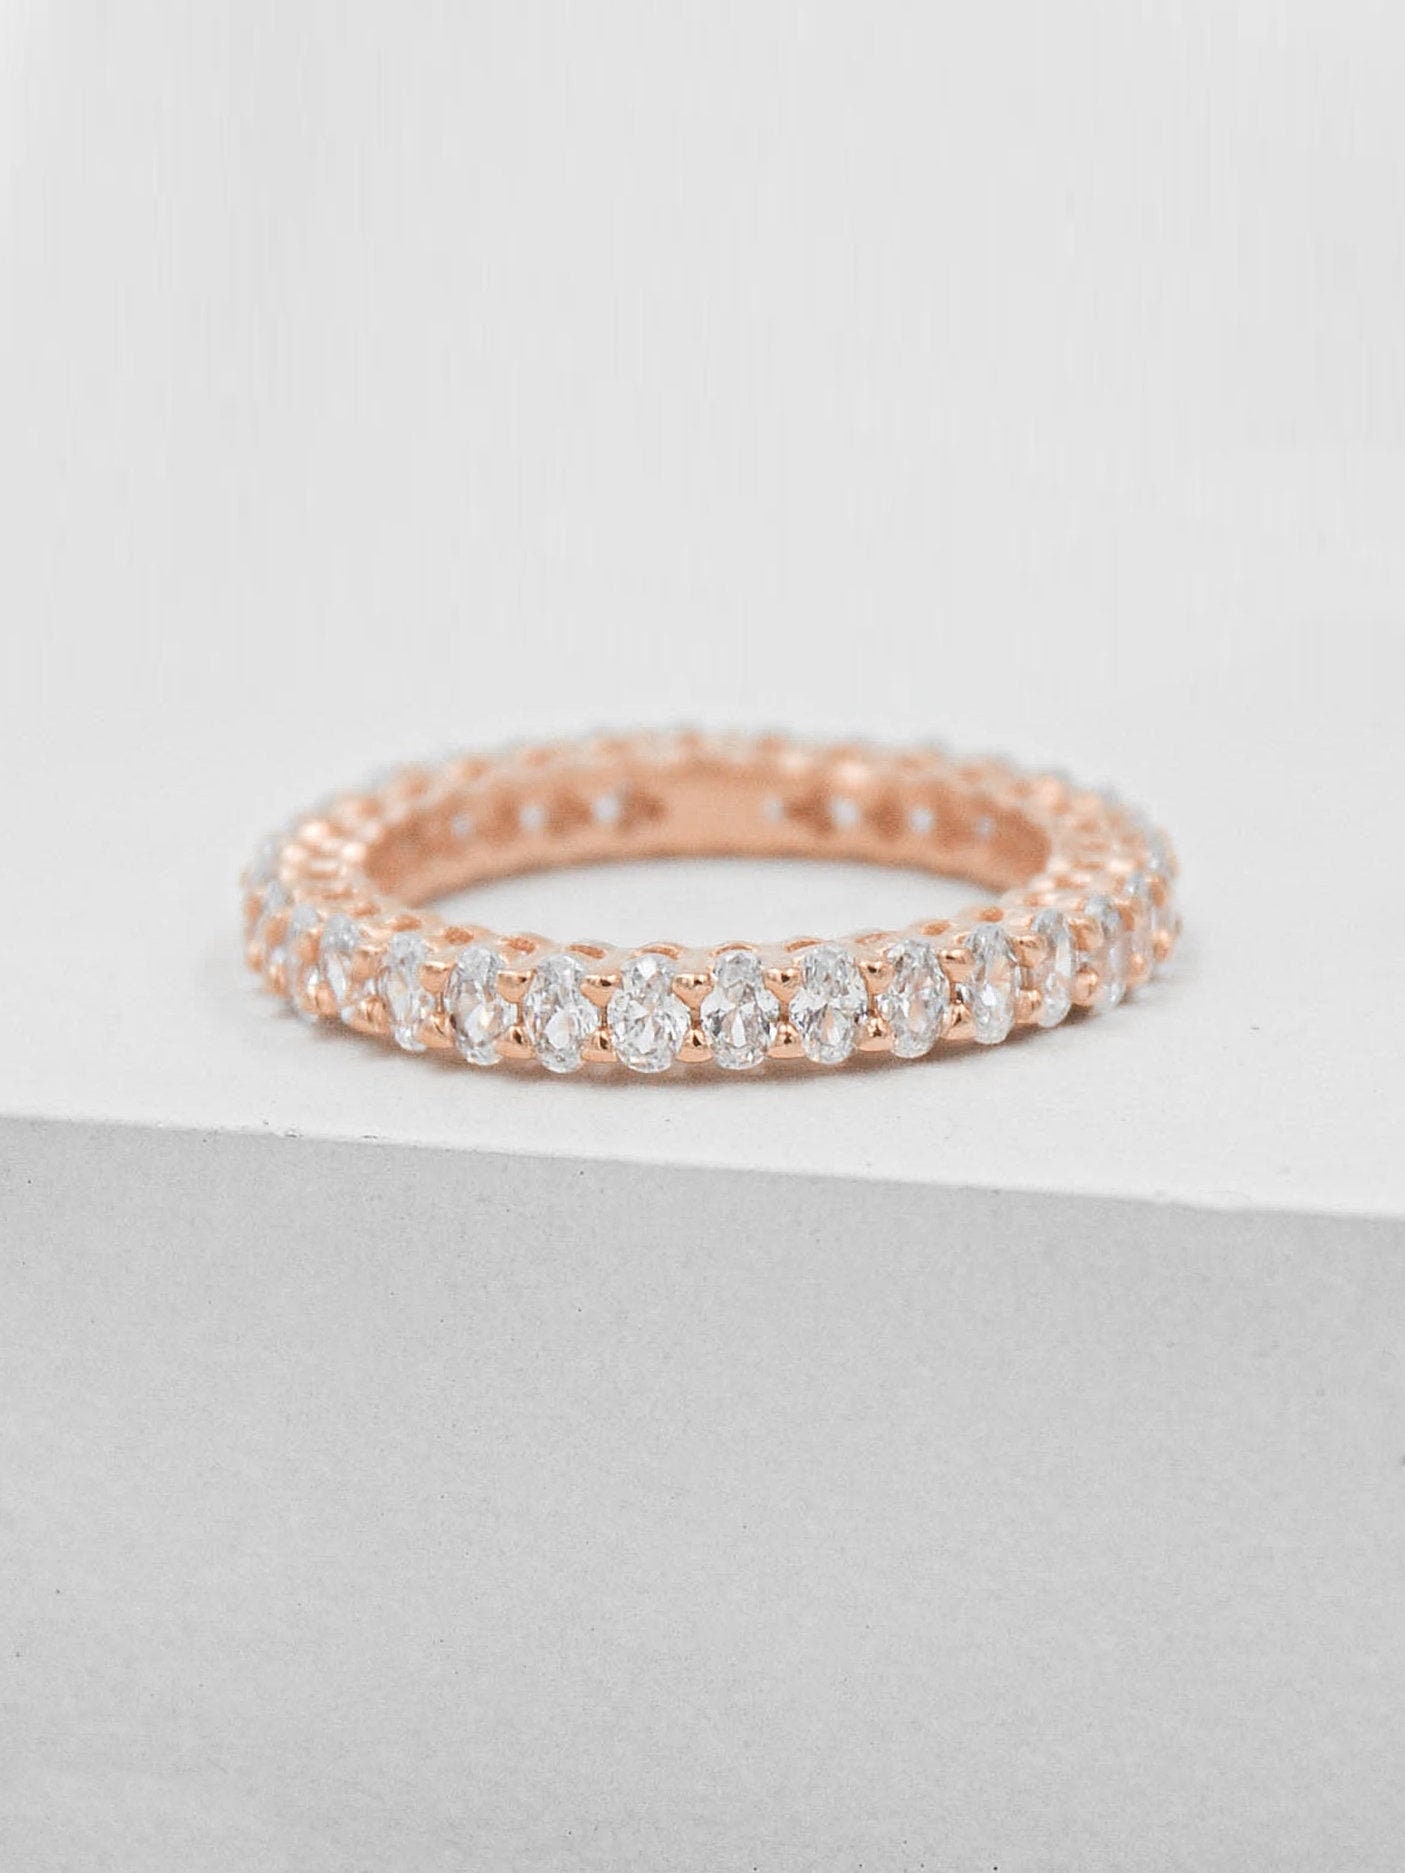 Oval Eternity Band Rose Gold Thick Stacking Ring Promise | Etsy